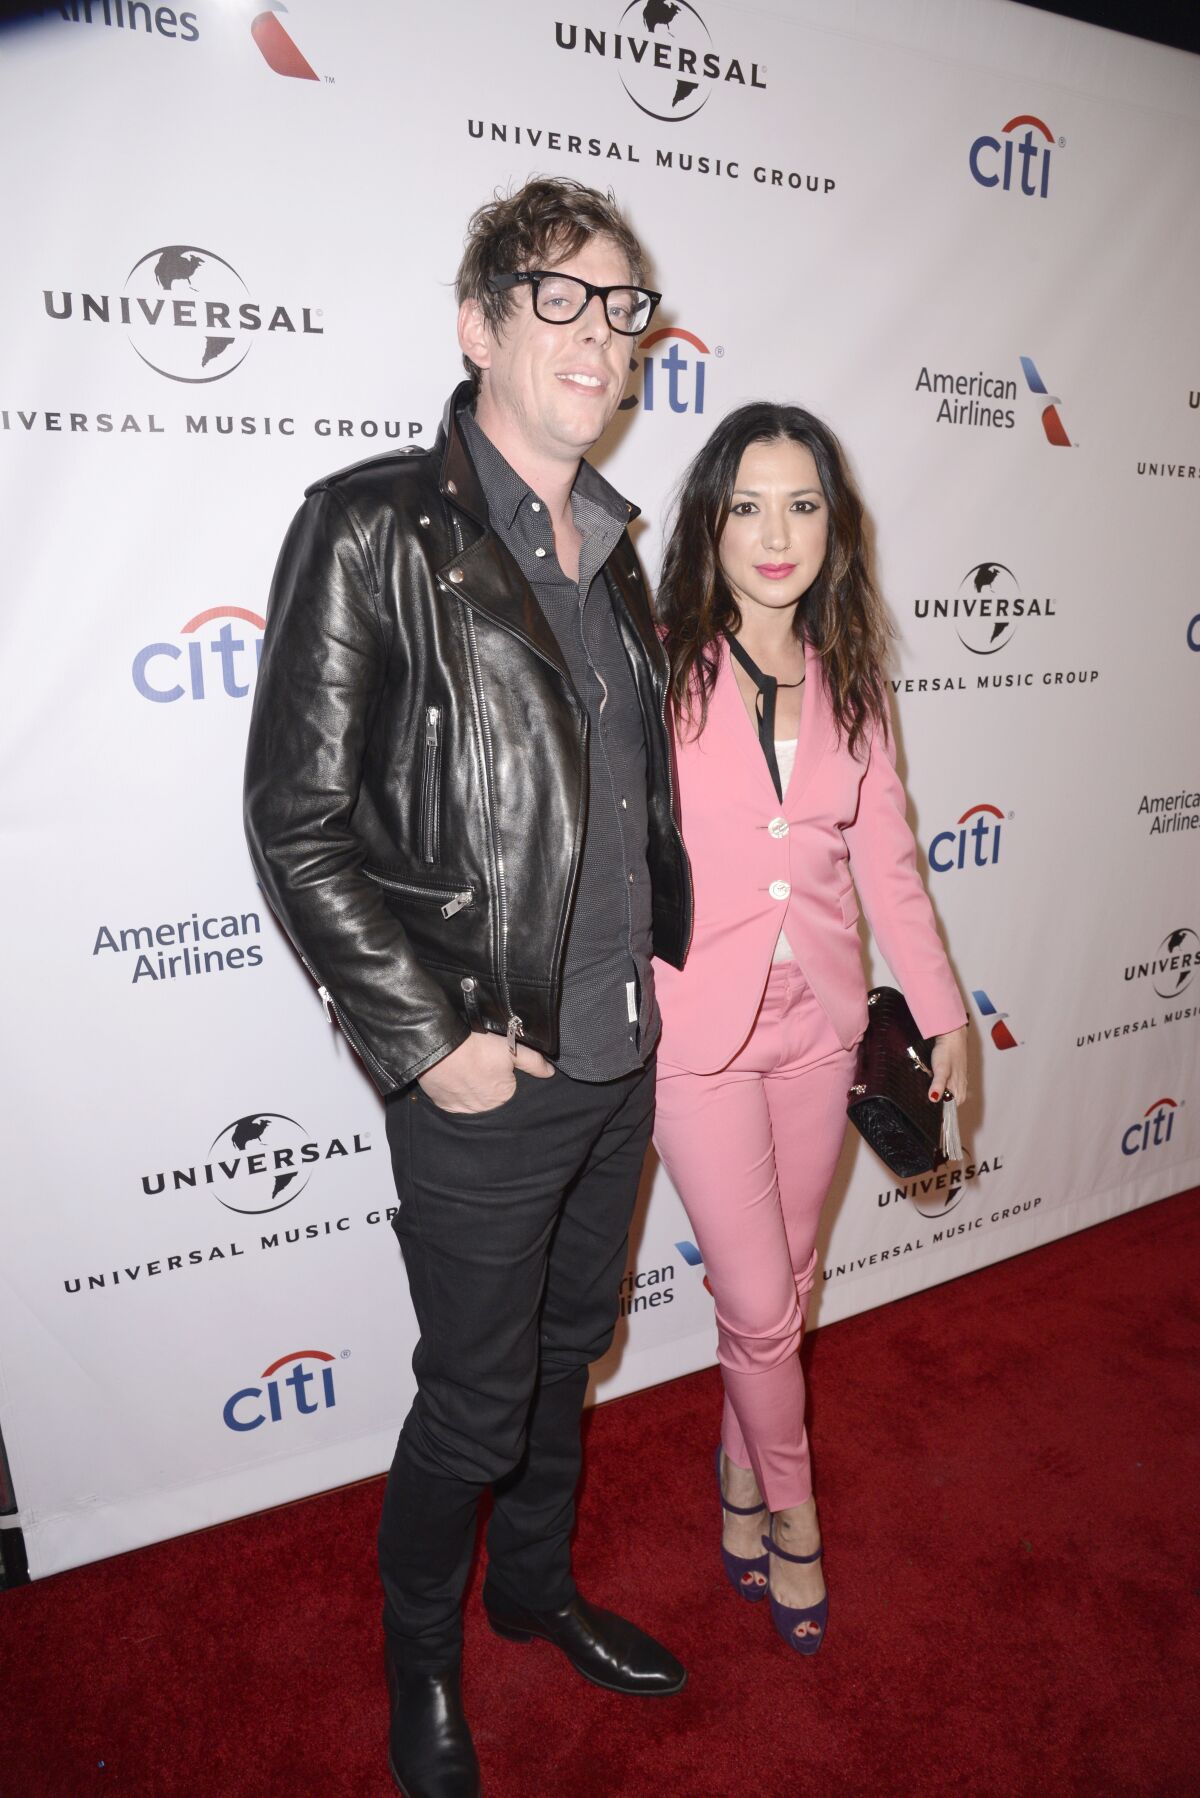 A man with glasses and a leather jacket and a woman in a pink suit pose on a red carpet